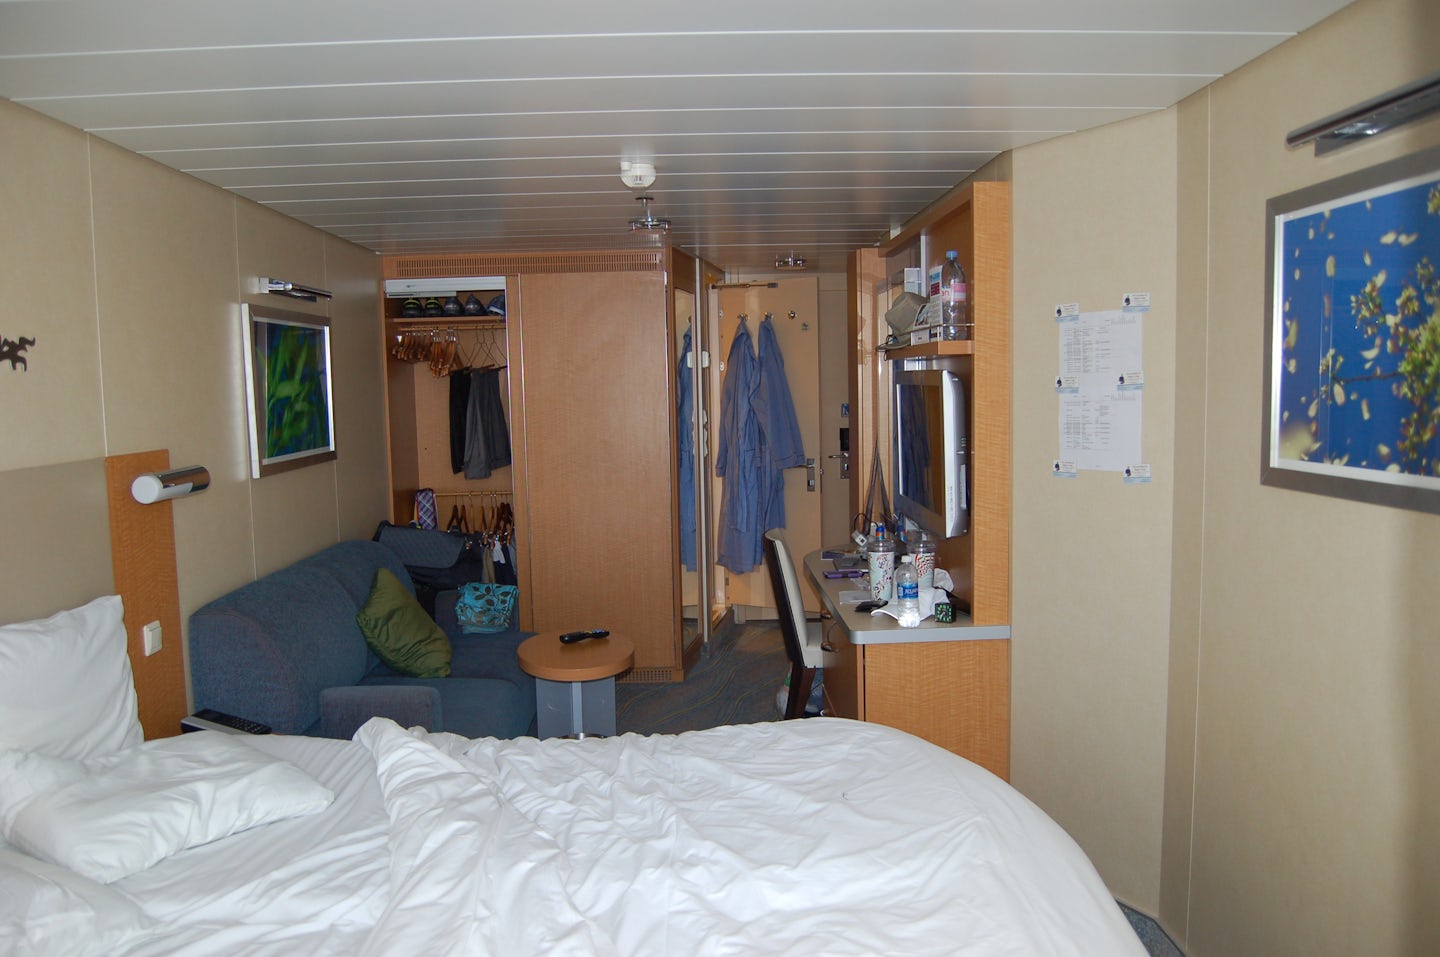 It is a little messy, but this was our cabin.  Plenty of room in that close